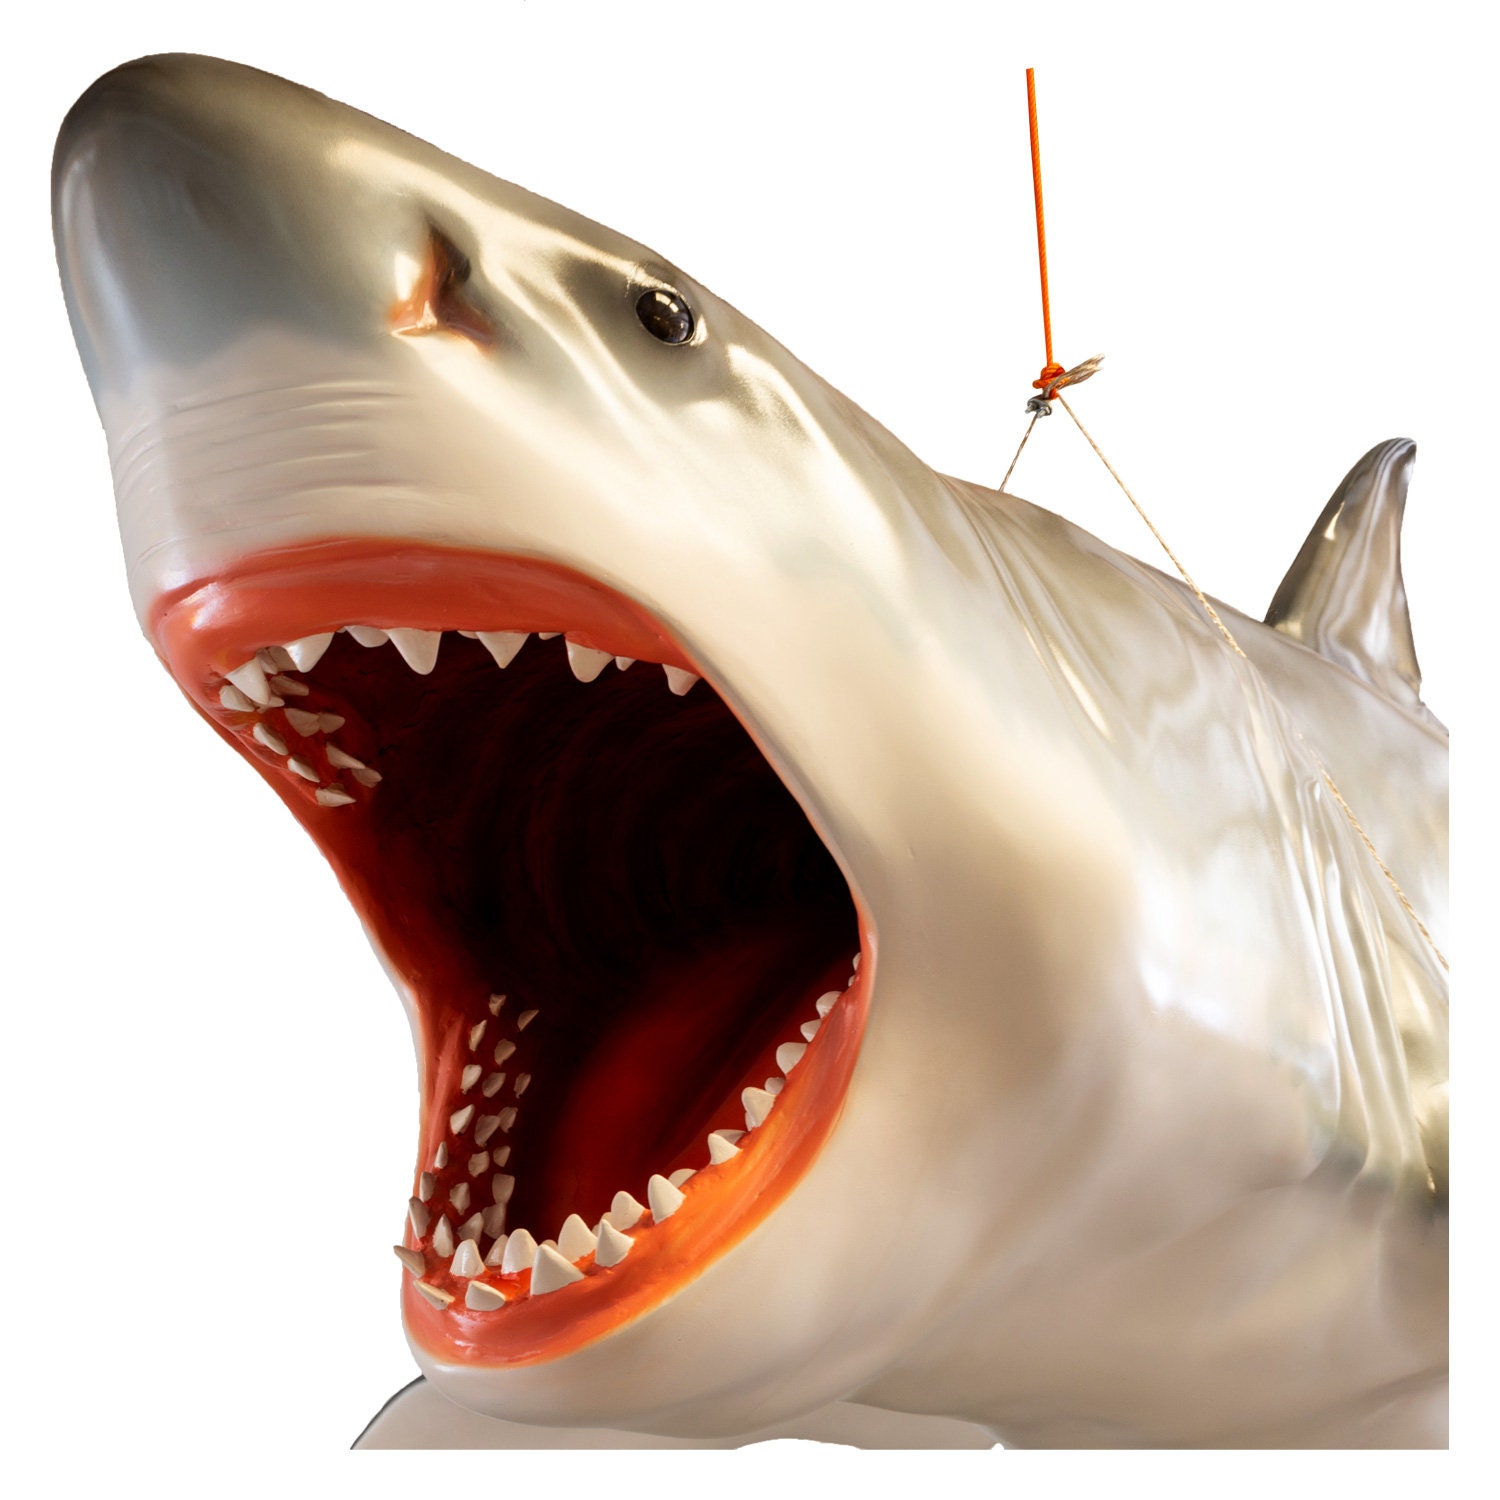 Life Size Jaws White Shark Hanging Figure Sculpture Huge Giant 11 Foot Length